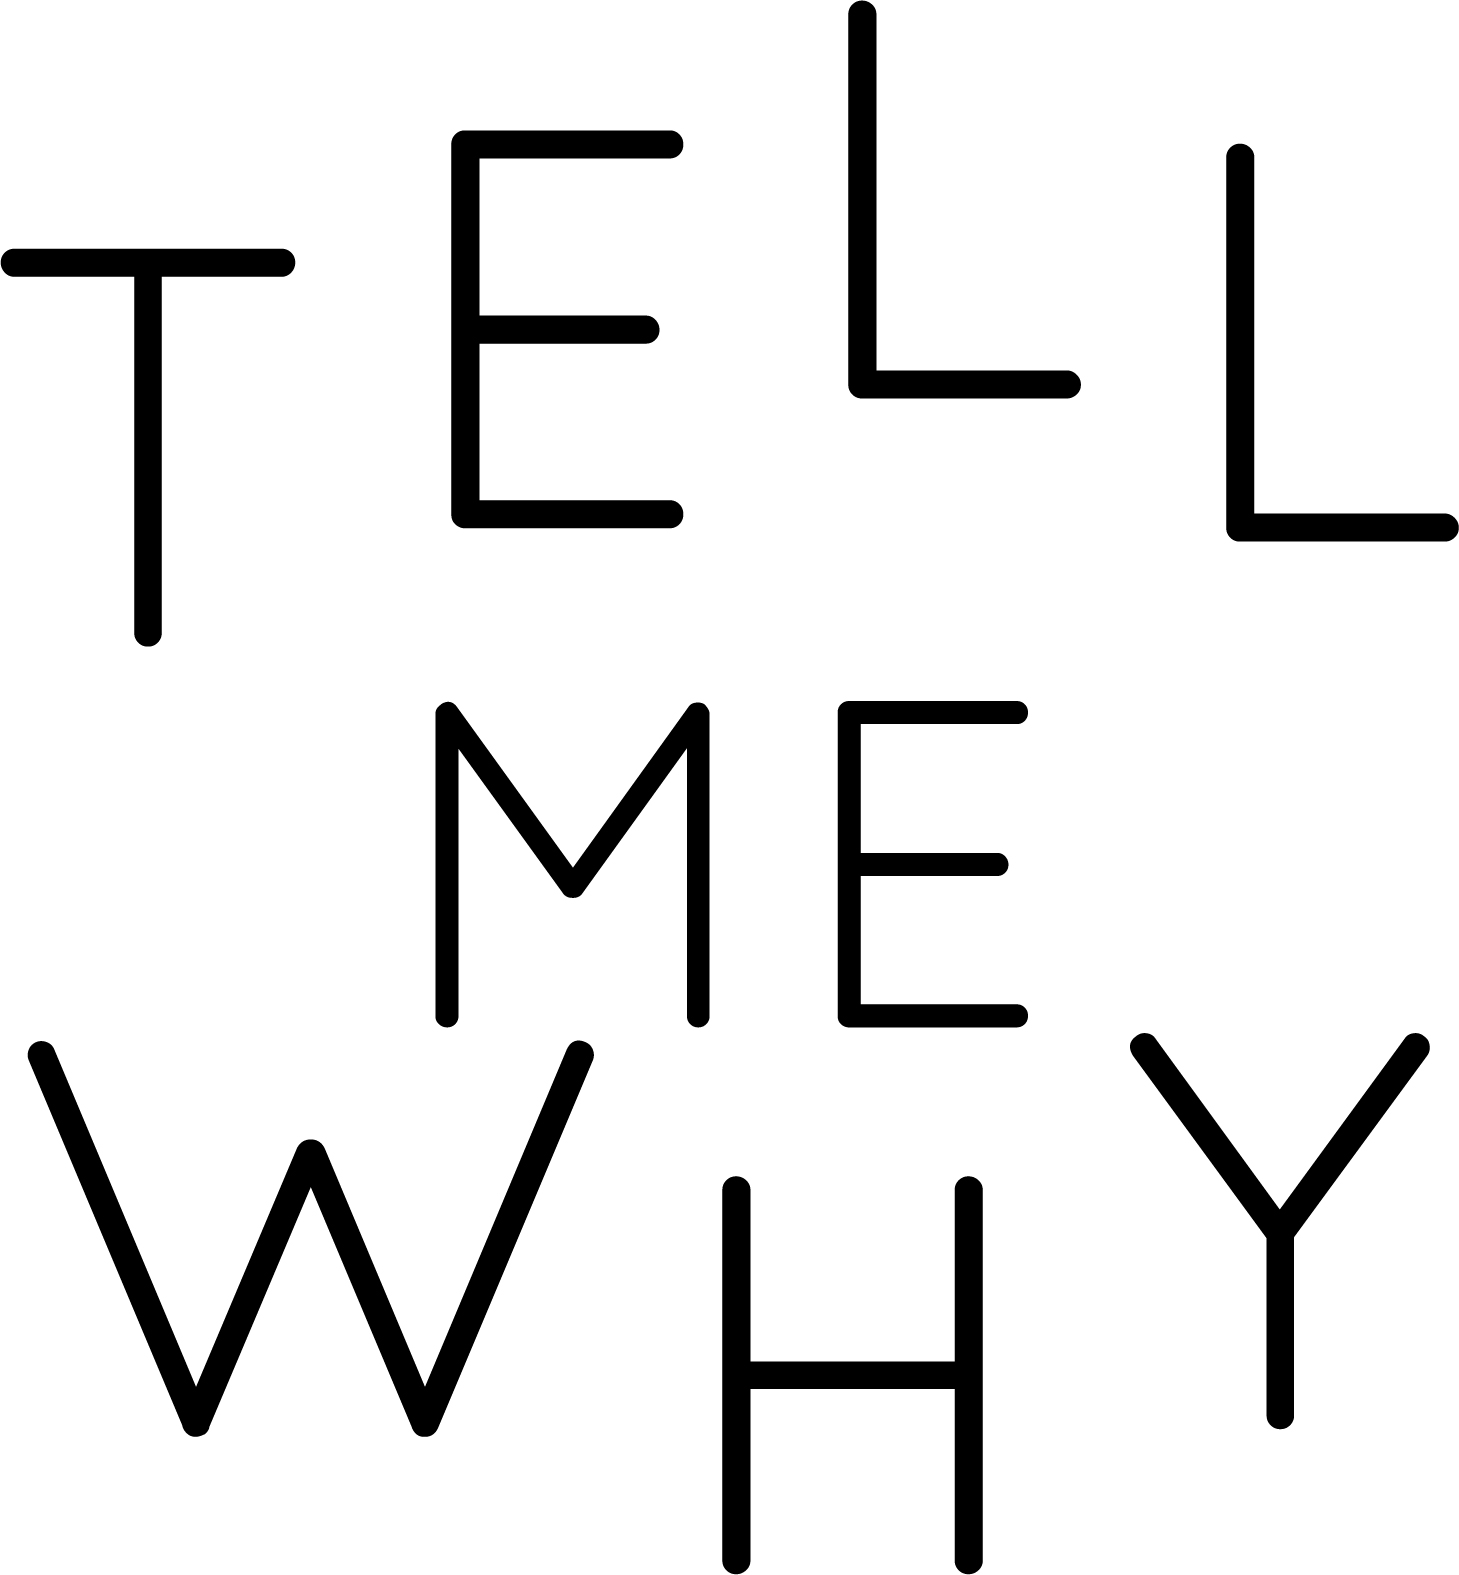 Tell me why to do. Tell me. Tell me why?. Why logo. Why why me.